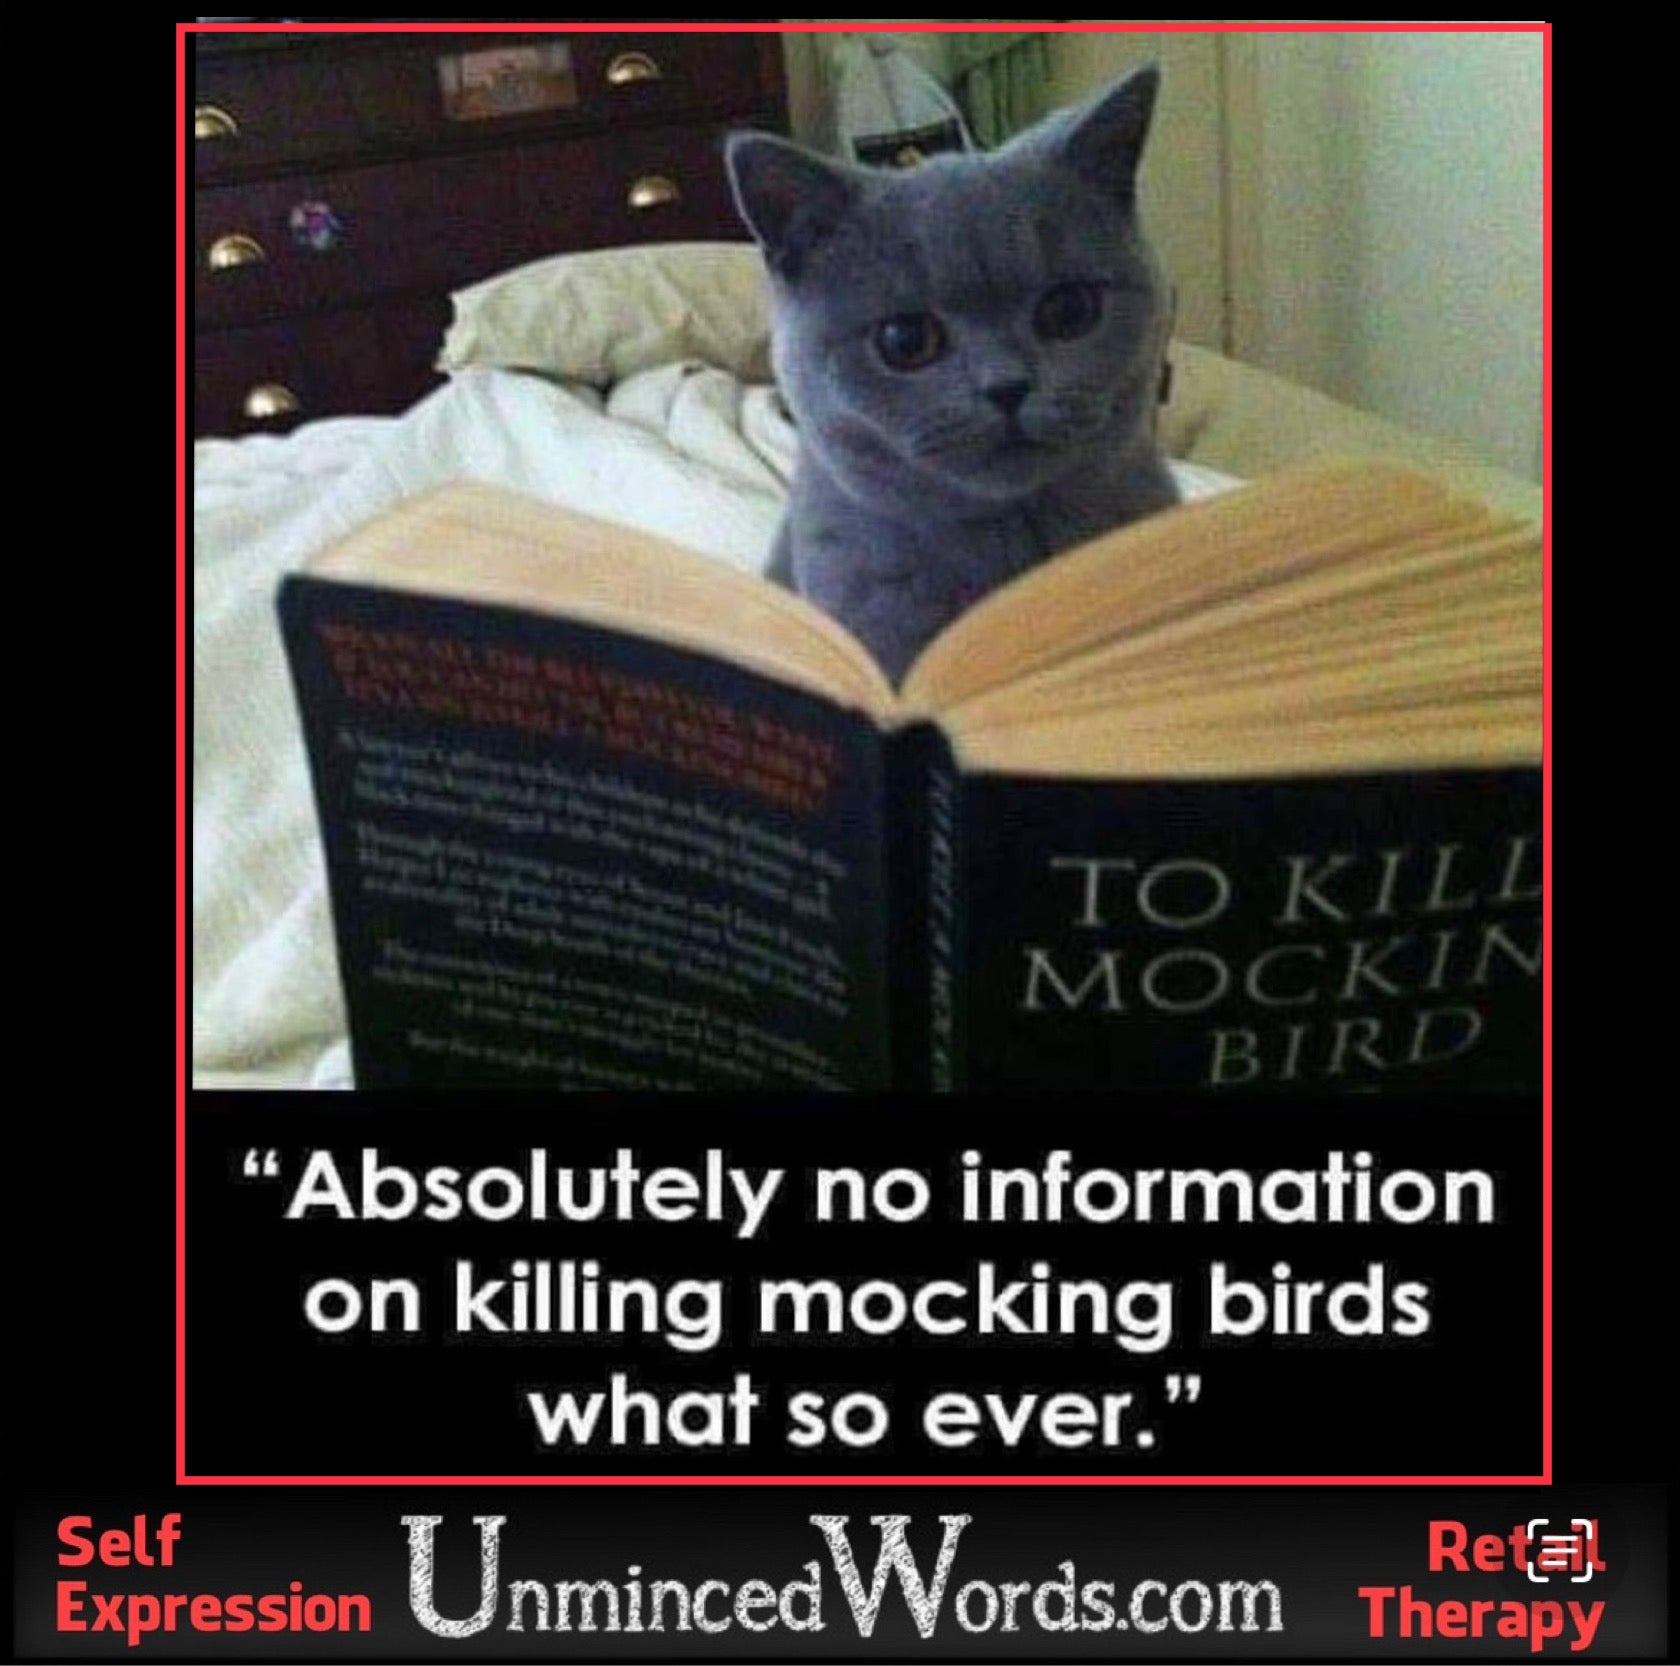 This cat is studying up